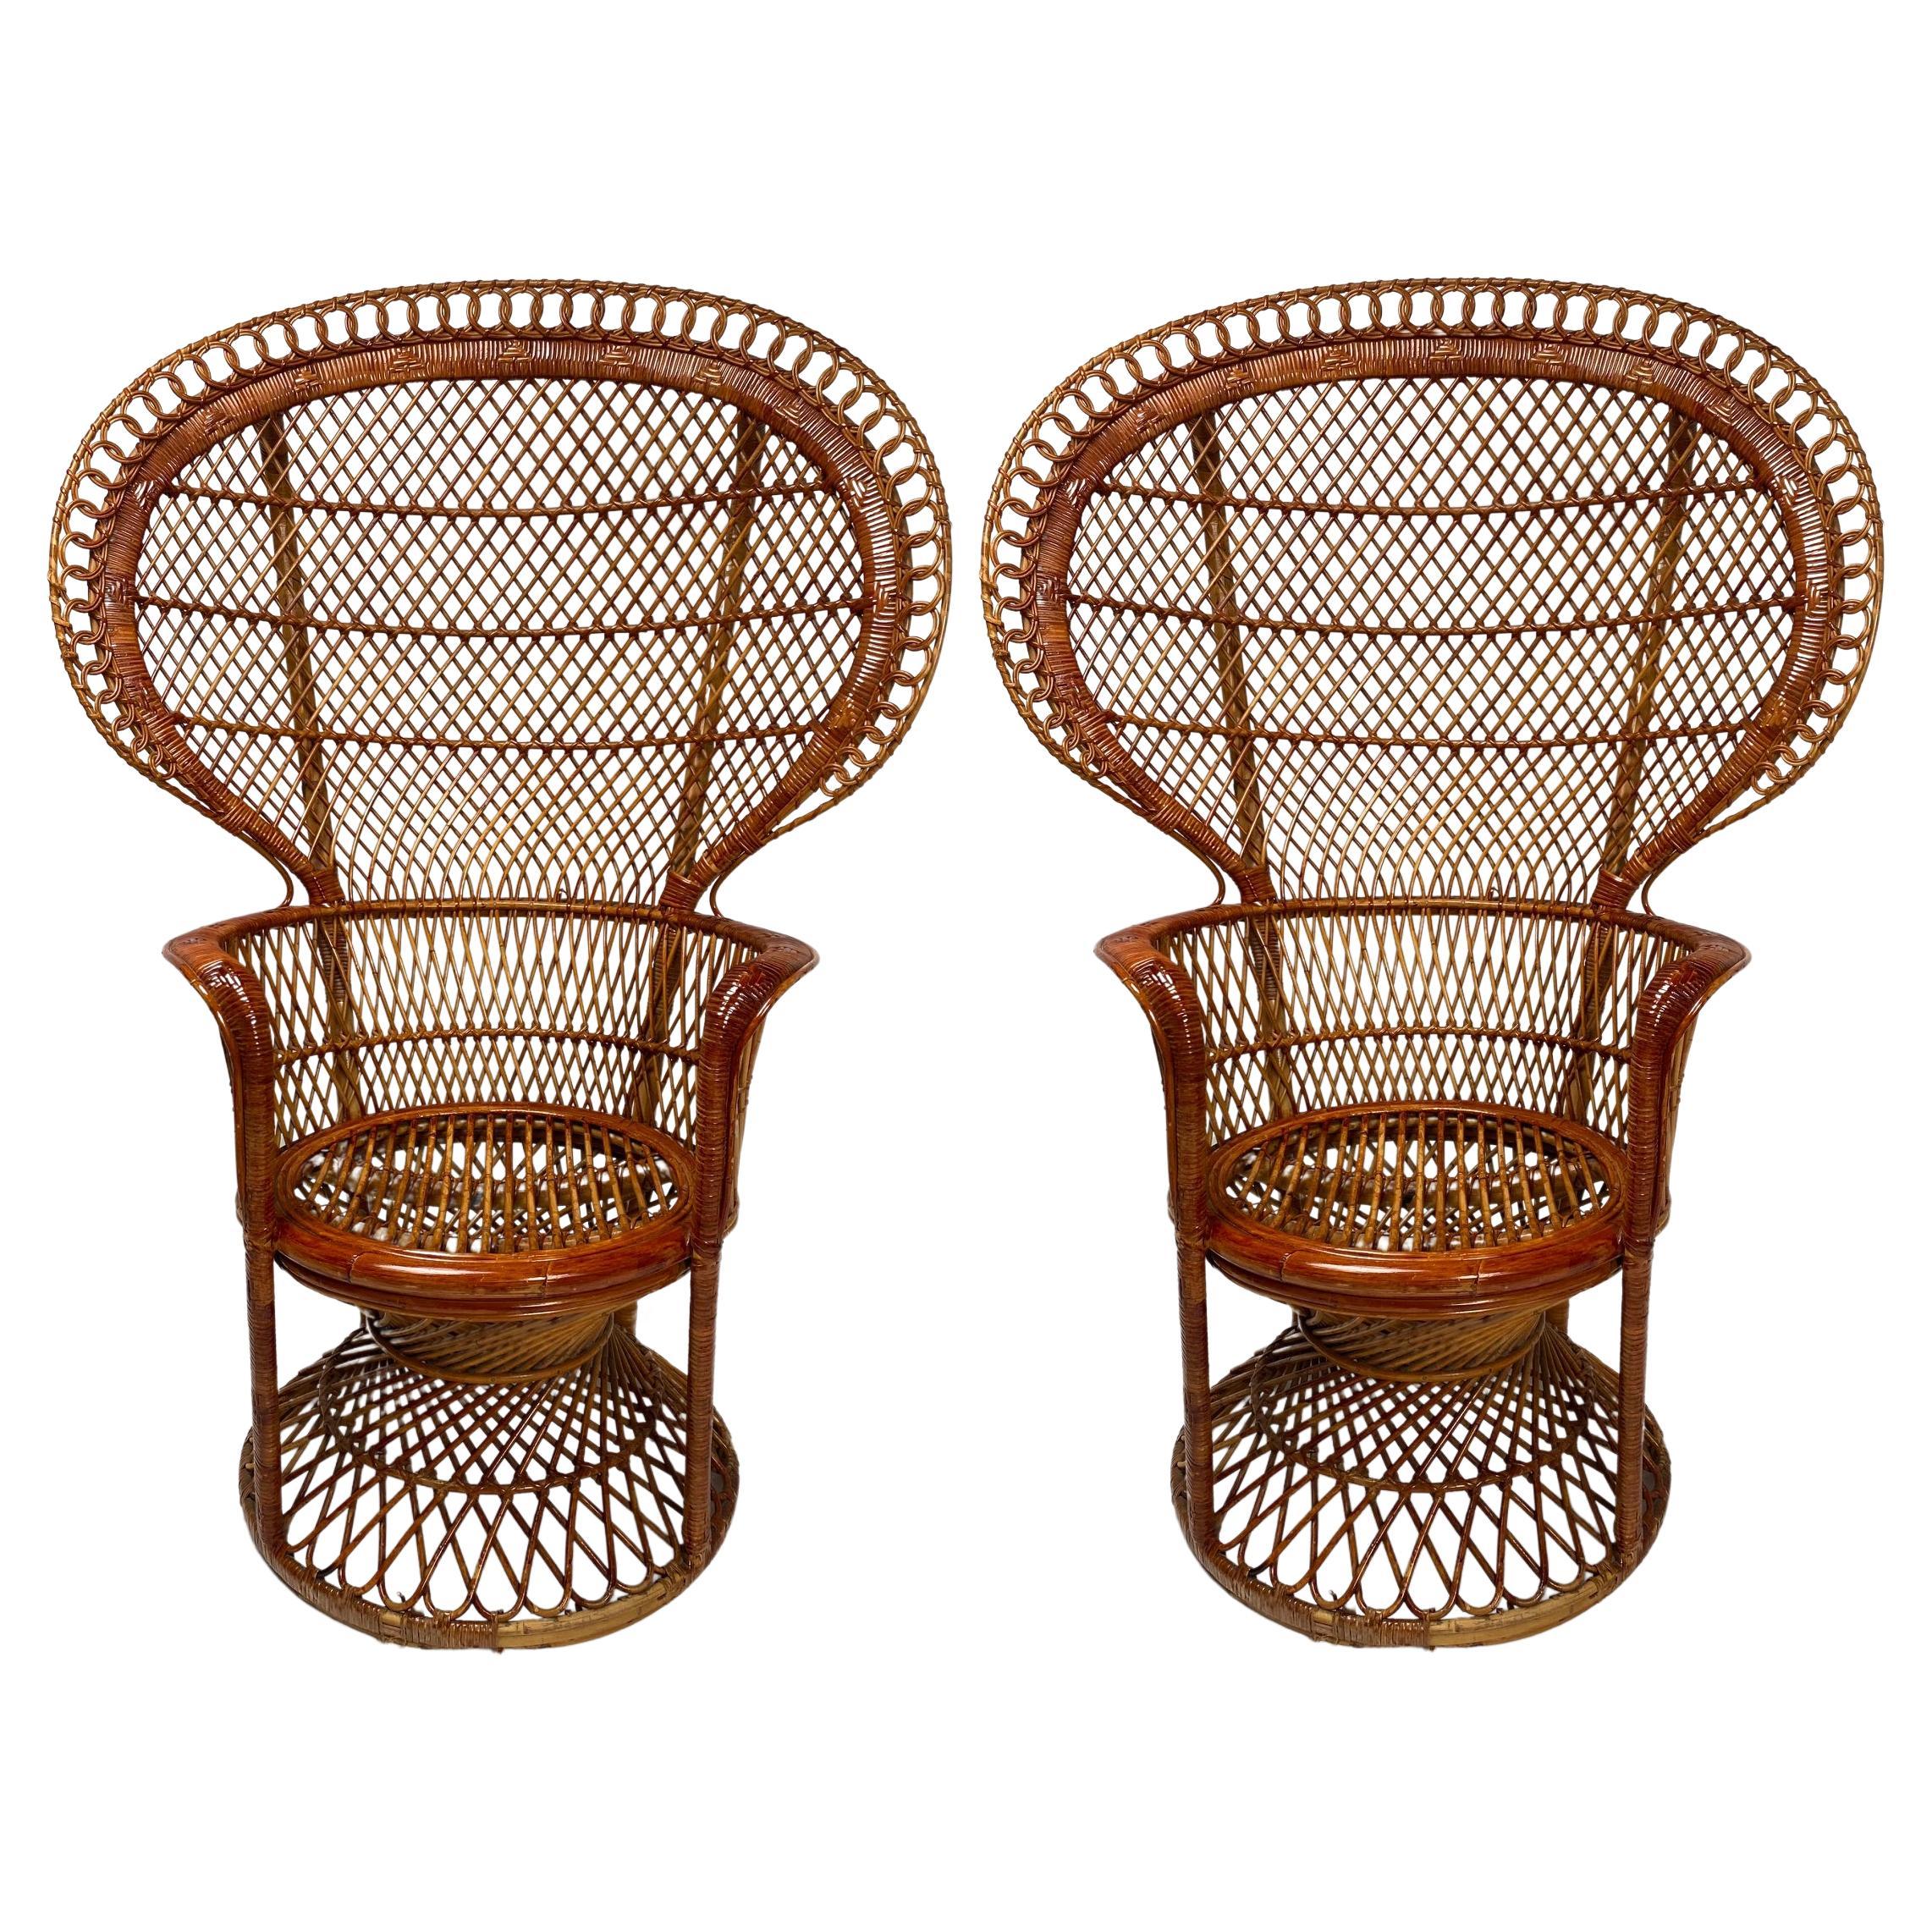 Monumental pair of wicker Armchairs, "Pavone" model, Italy, 1970s For Sale